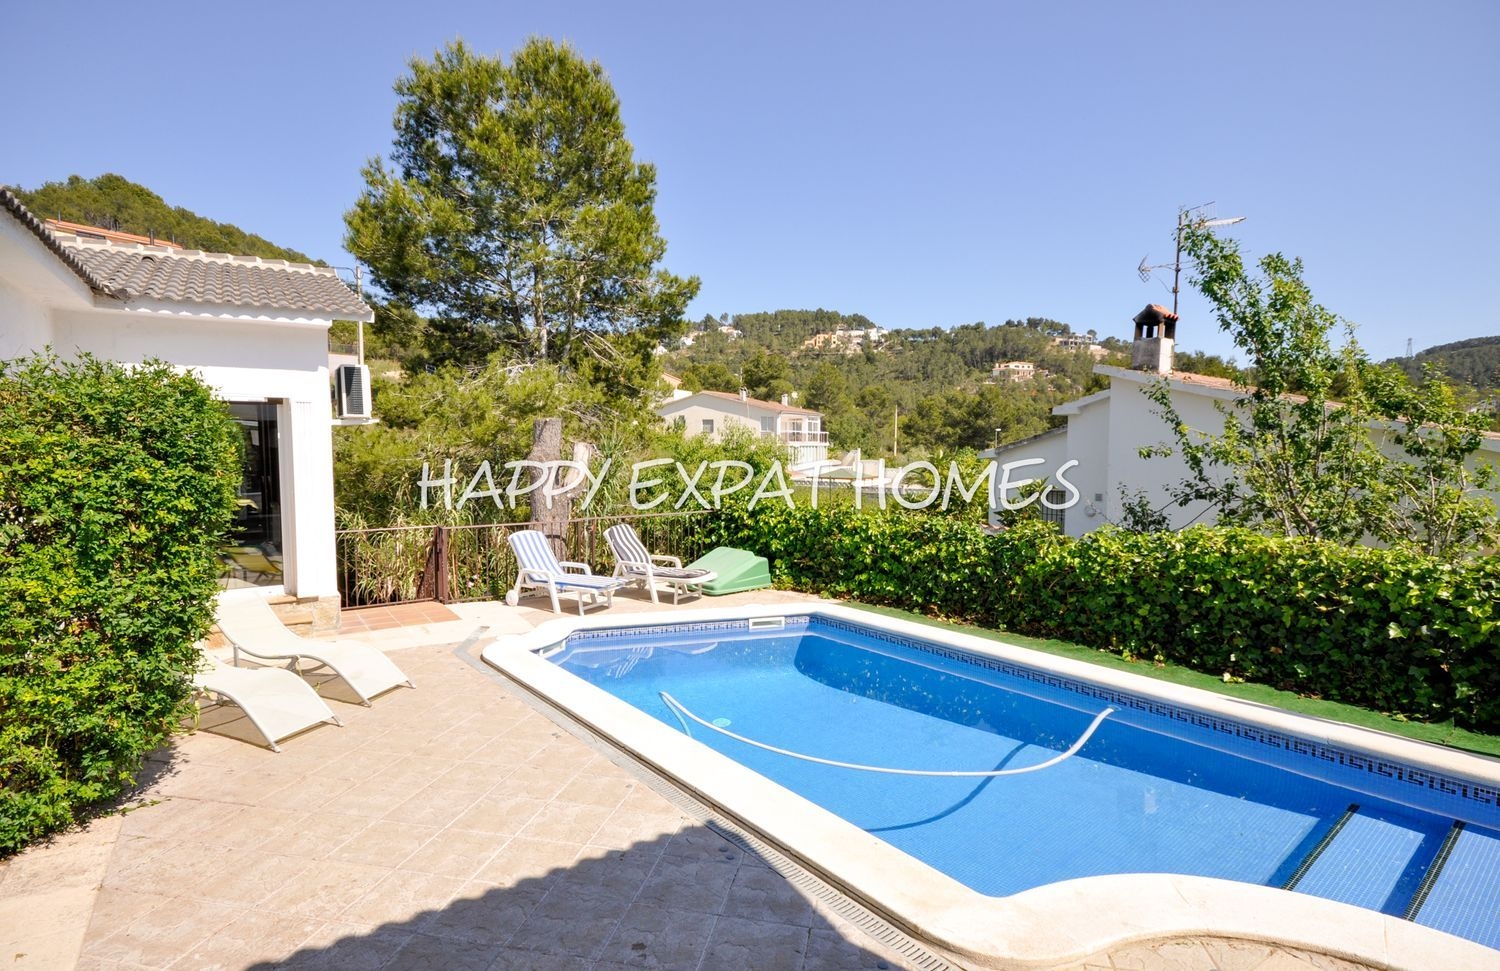 Bungalow style villa surrounded by the green hills of Garraf